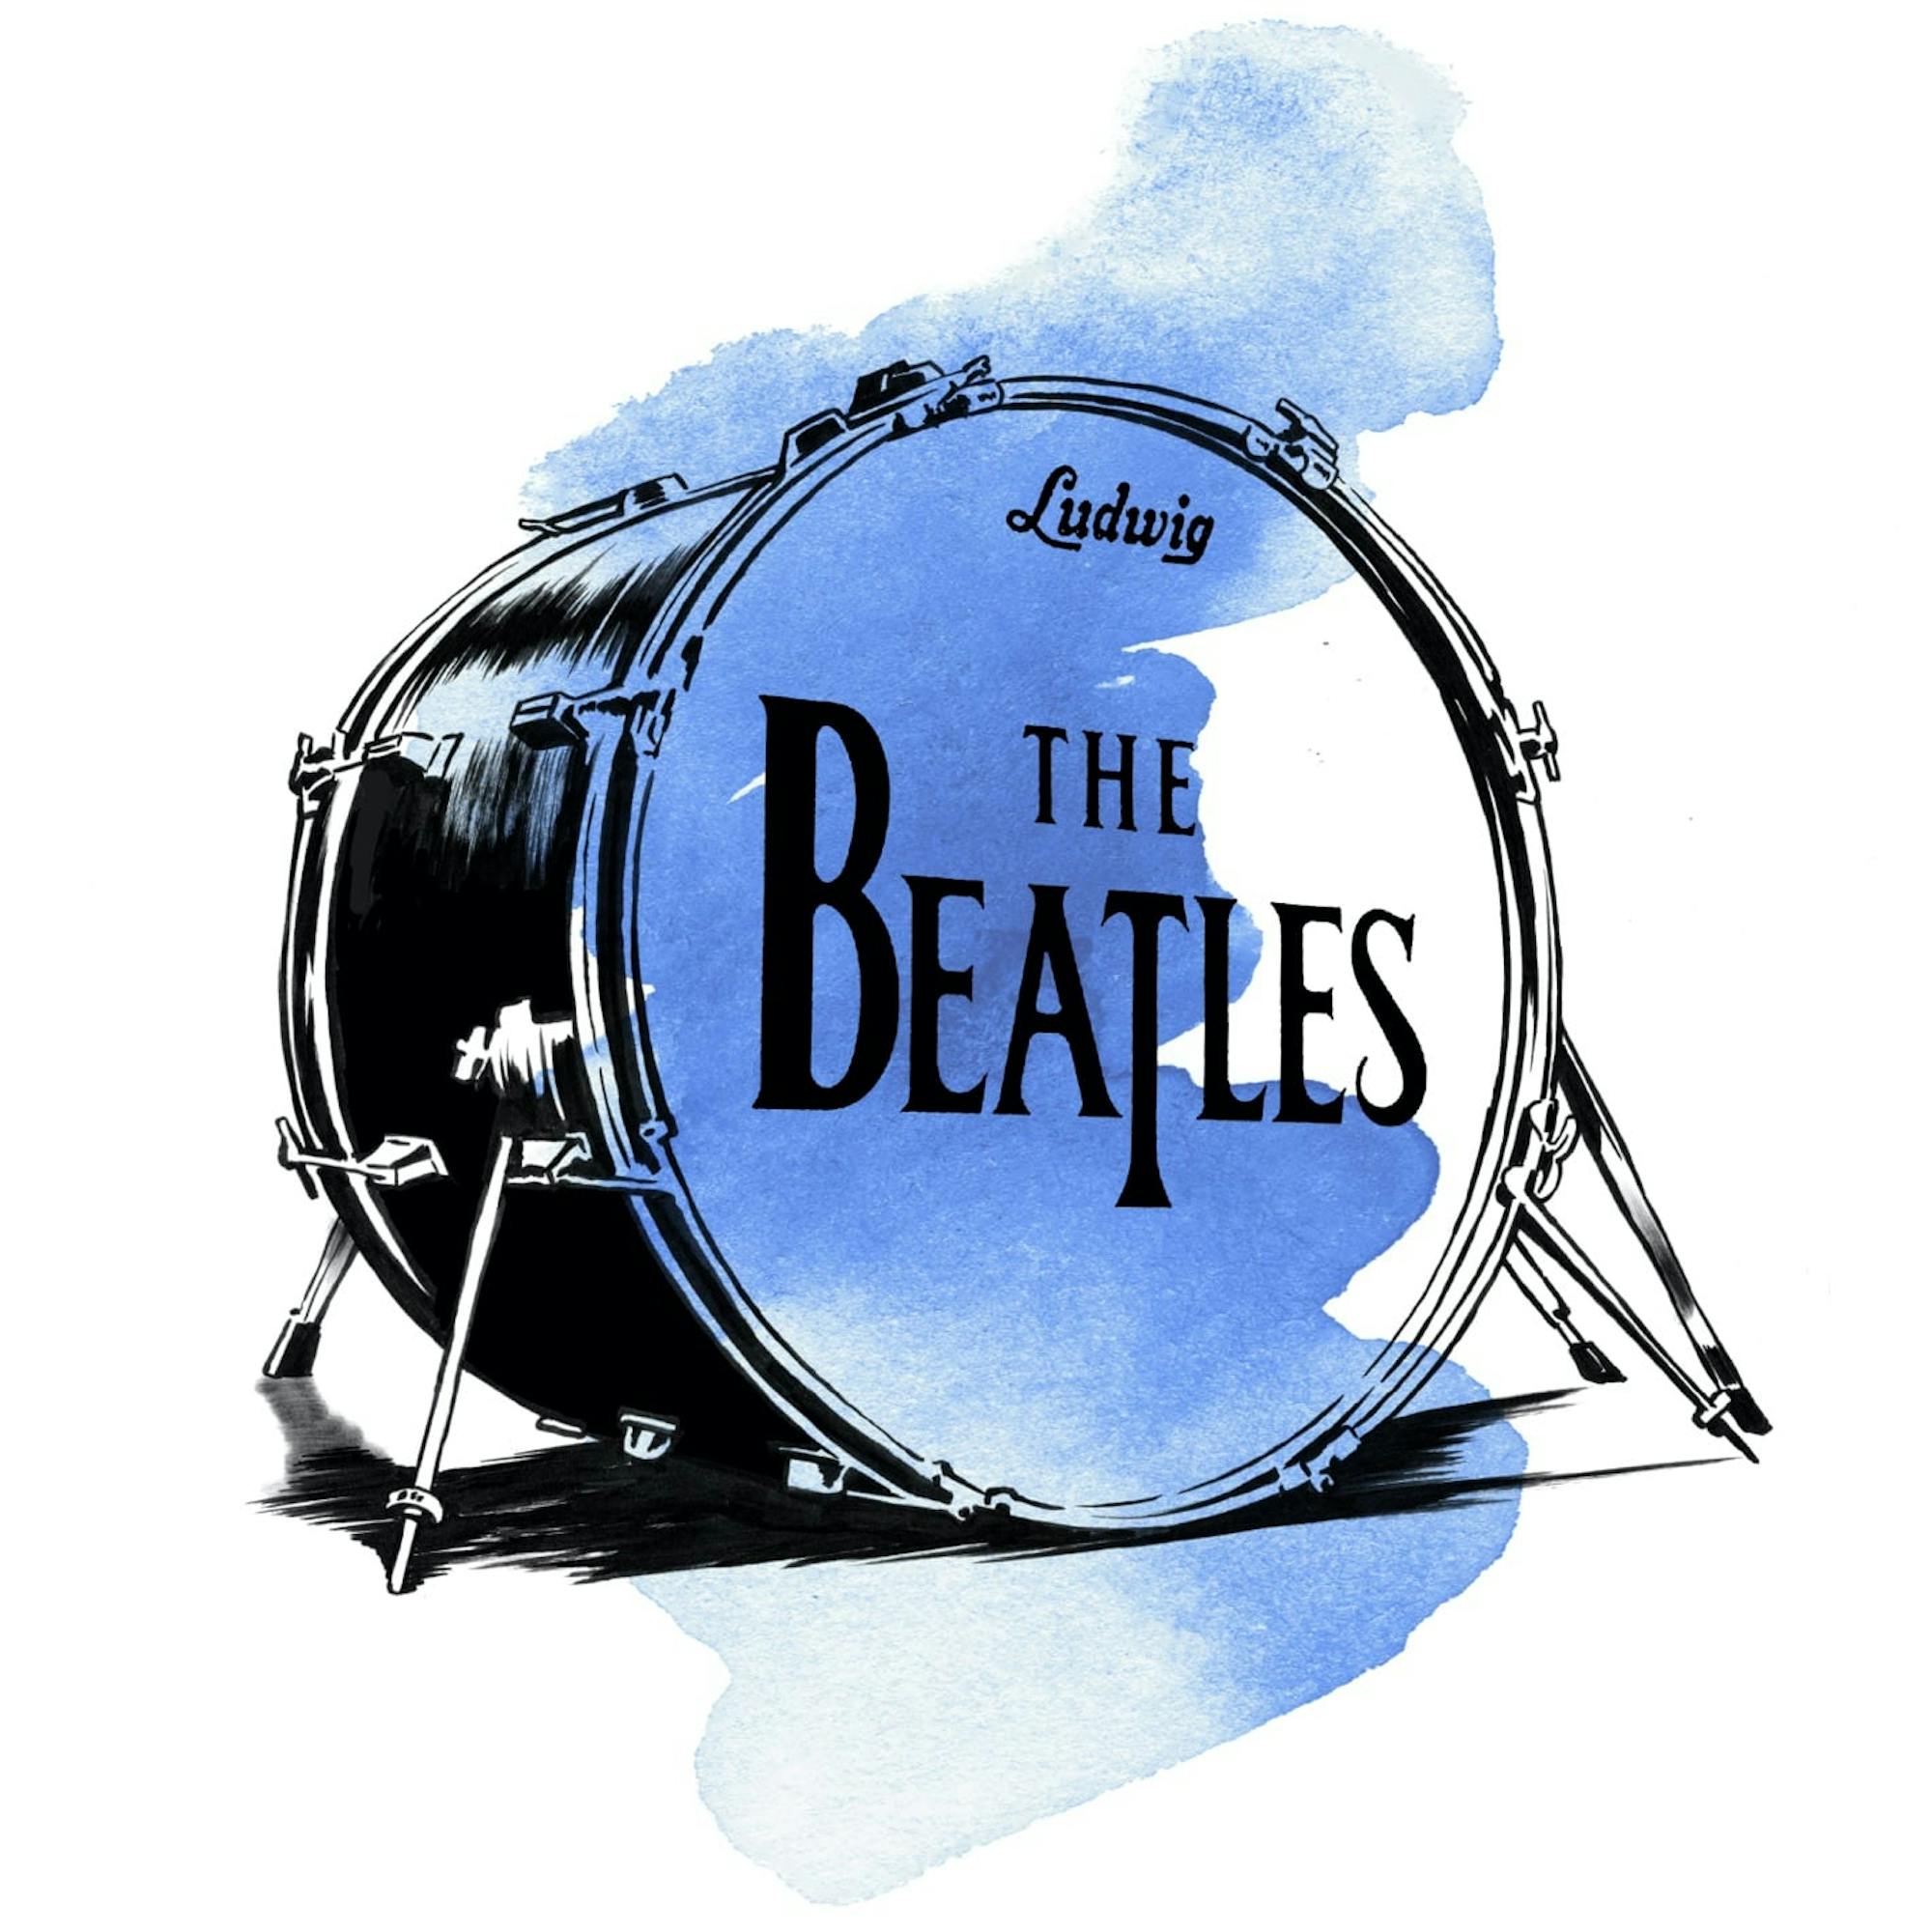 A watercolor illustration of a Ludwig bass drum repping the Beatles. Some 73 million people watched the band’s U.S. debut on The Ed Sullivan Show in 1964, and Diane Warren was one of them!